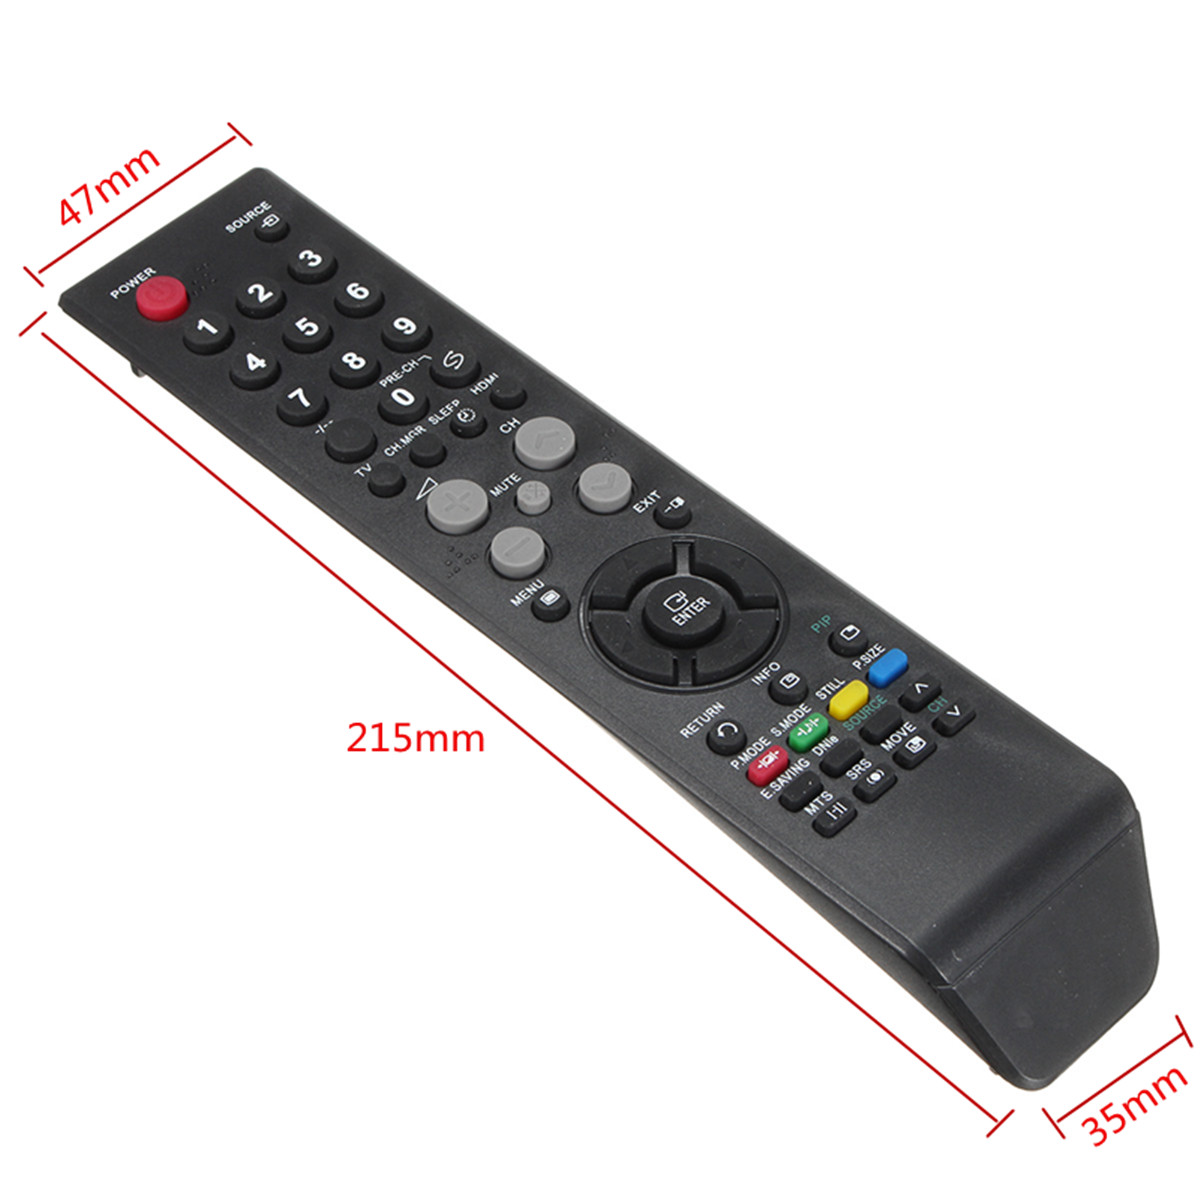 Universal-Remote-Control-For-Samsung-HDTV-LED-Smart-TV-BN59-00507A-BN59-00512A-BN59-00516A-BN59-0051-1199826